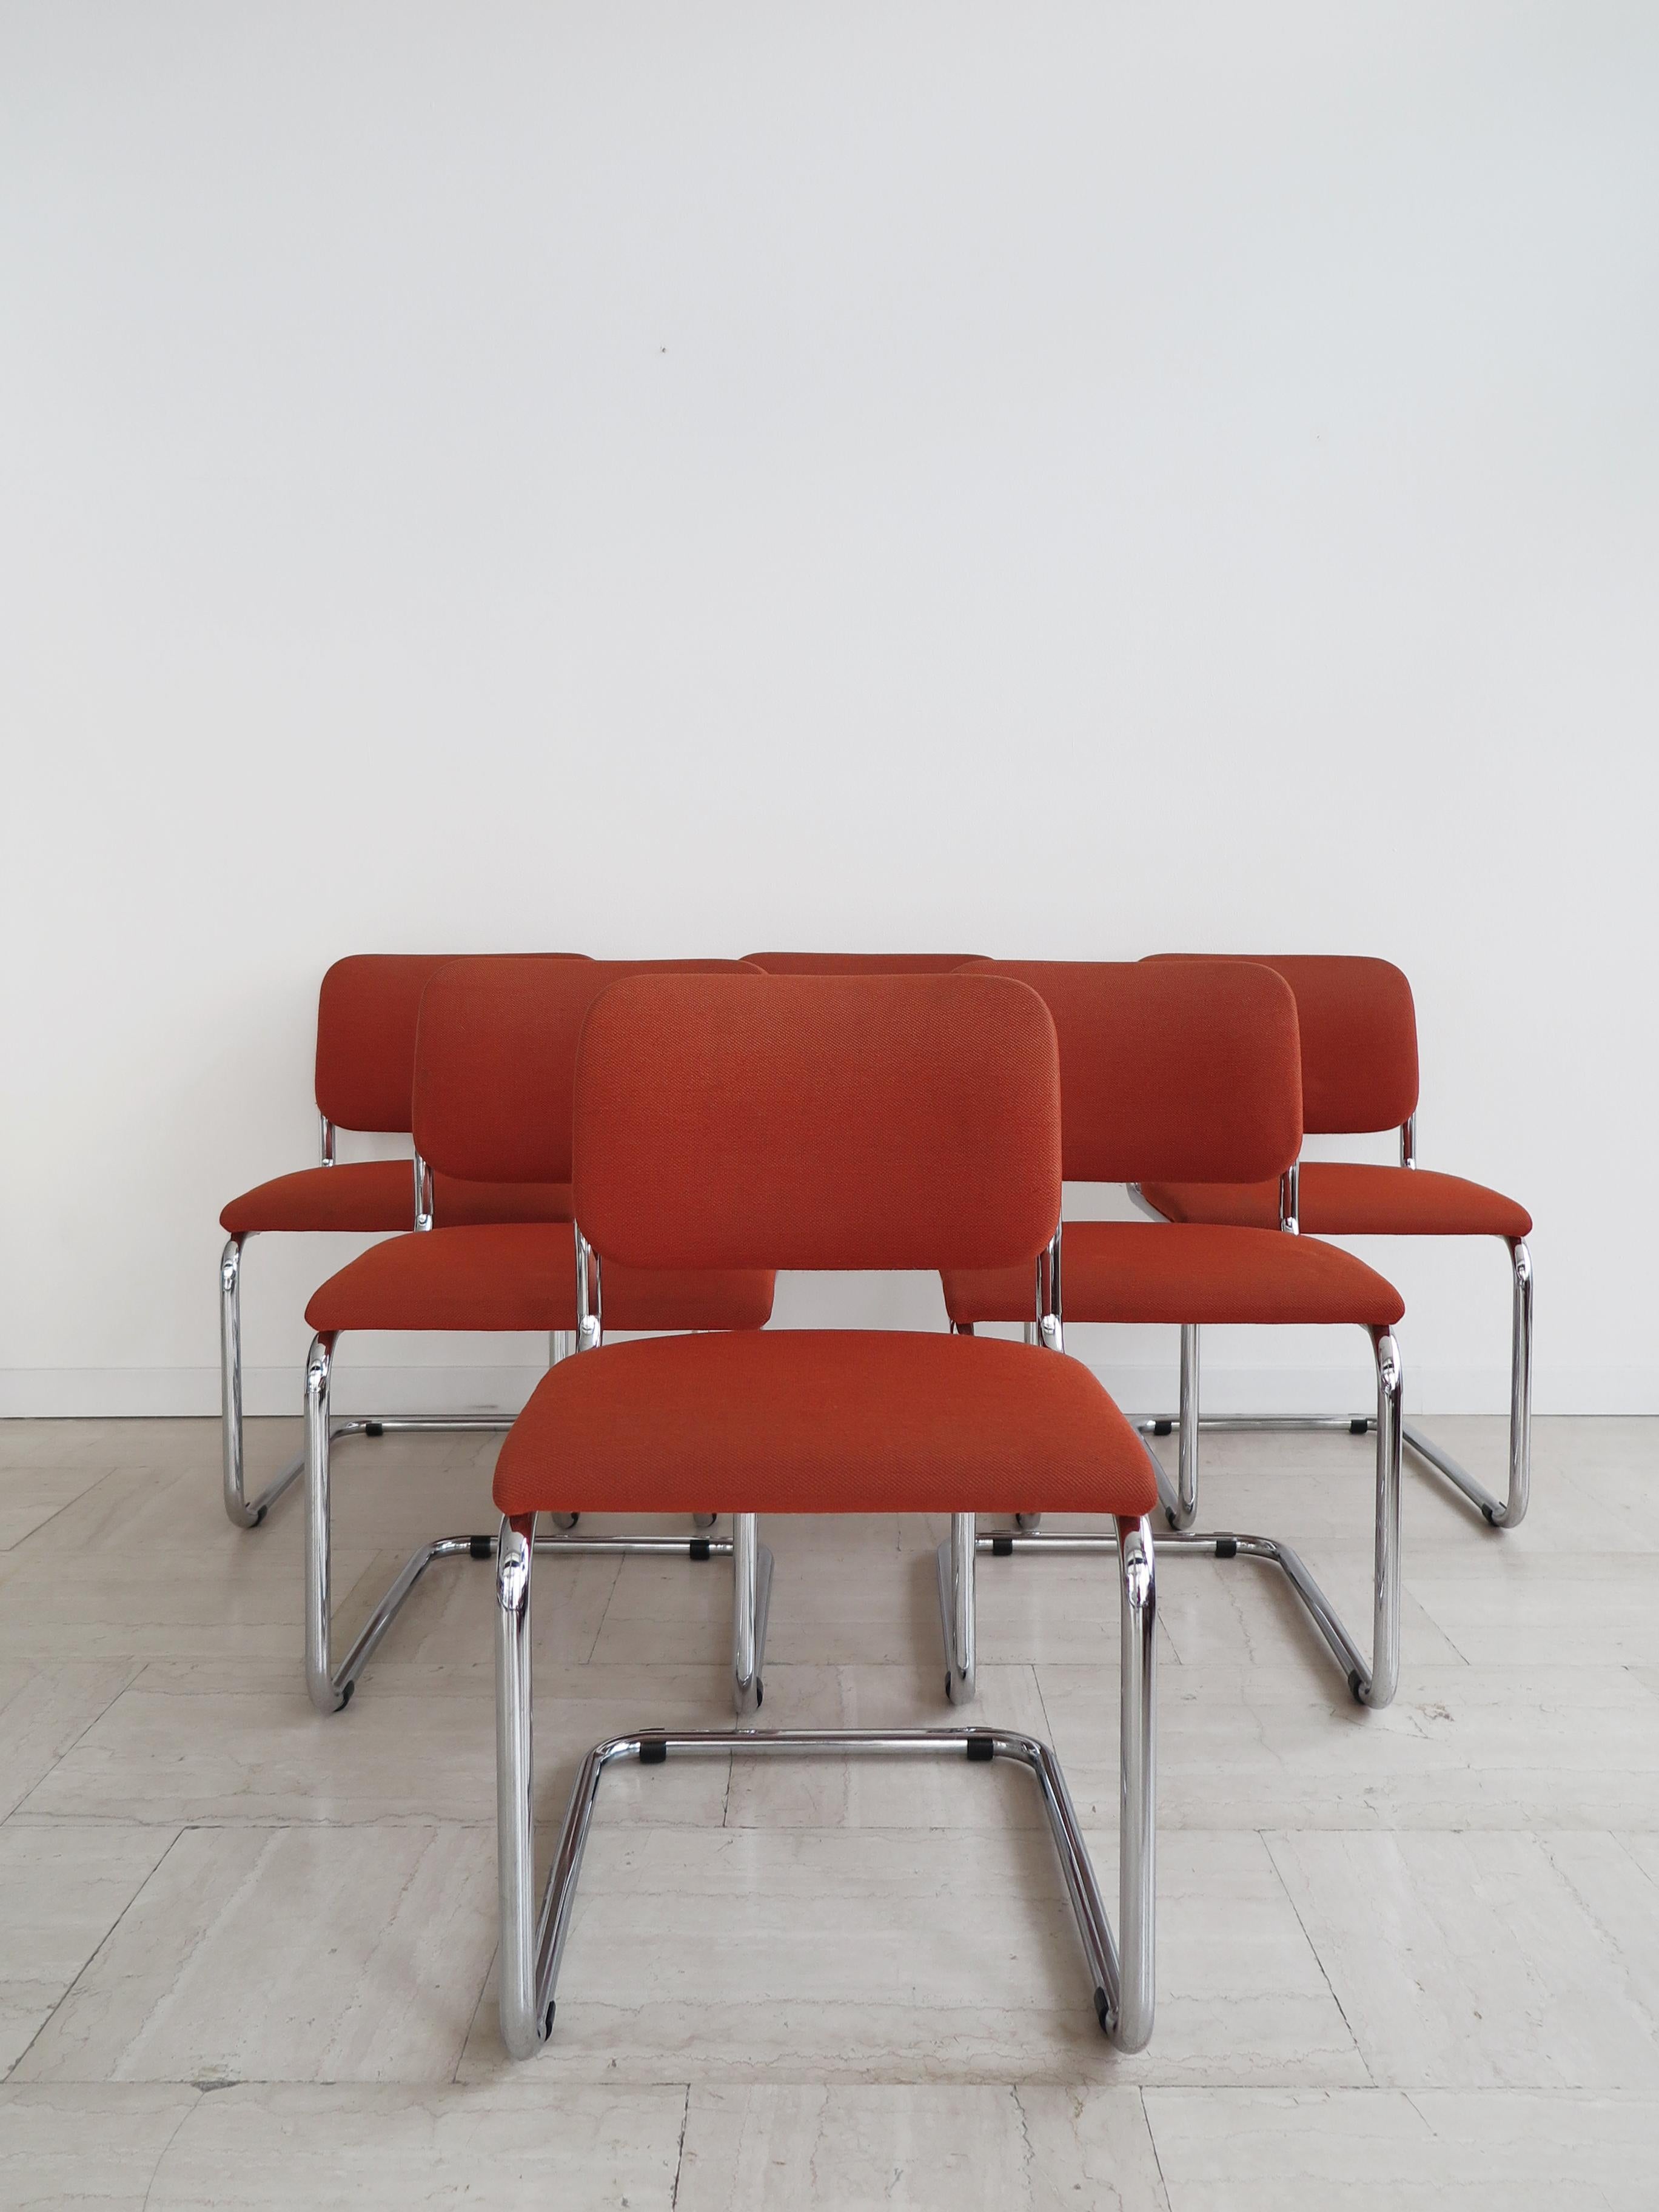 Set of six Italian Mid-Century Modern design dining chairs model “Cesca” designed by Marcel Breuer with curved chromed metal frame and fabric seat and back, original model produced by Gavina since 1960s, original Gavina S.p.A. label under each seat,